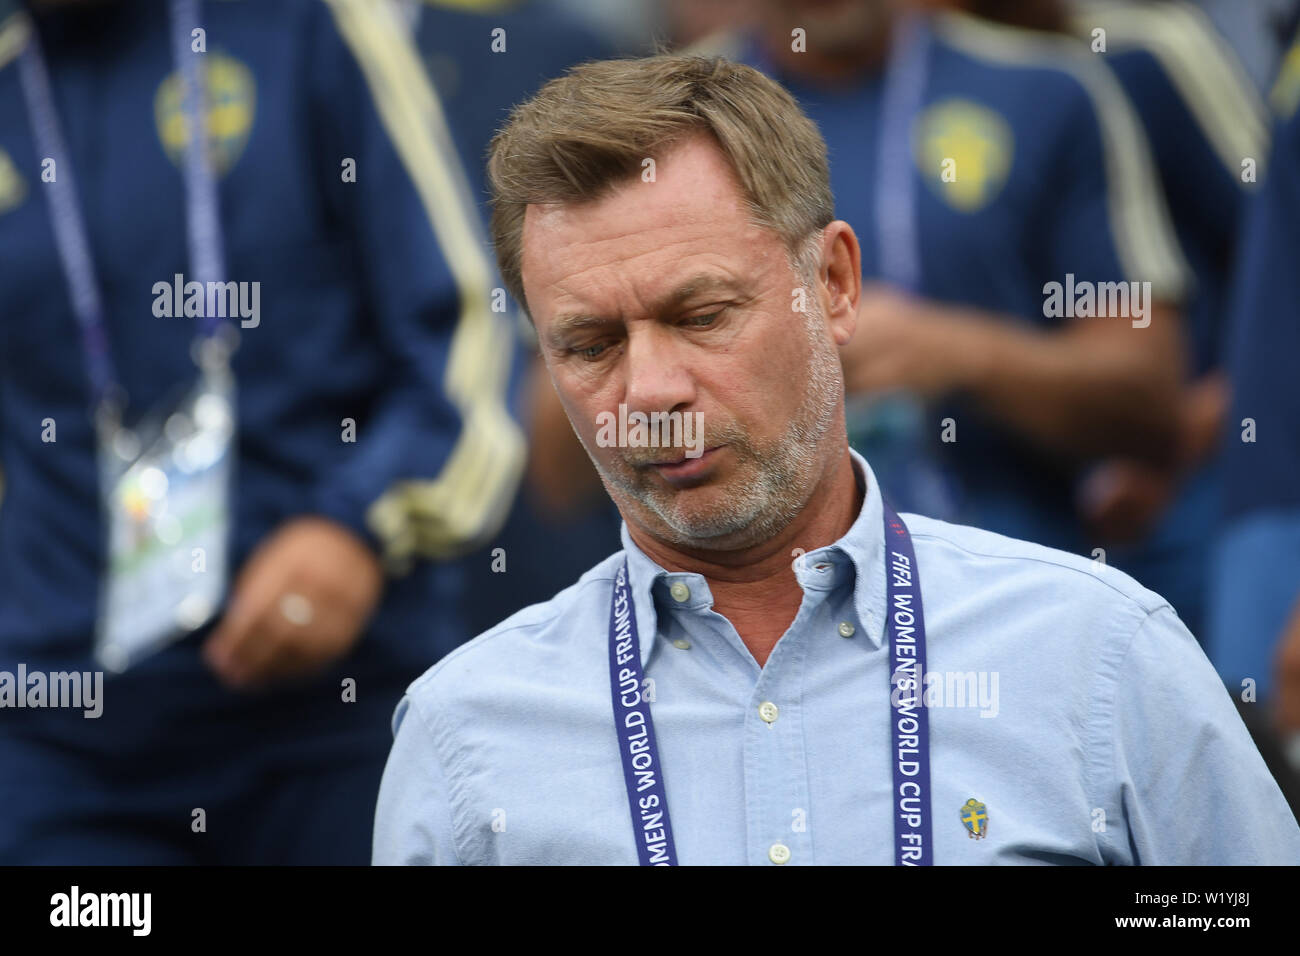 Page 2 Swedish Football Coach High Resolution Stock Photography And Images Alamy